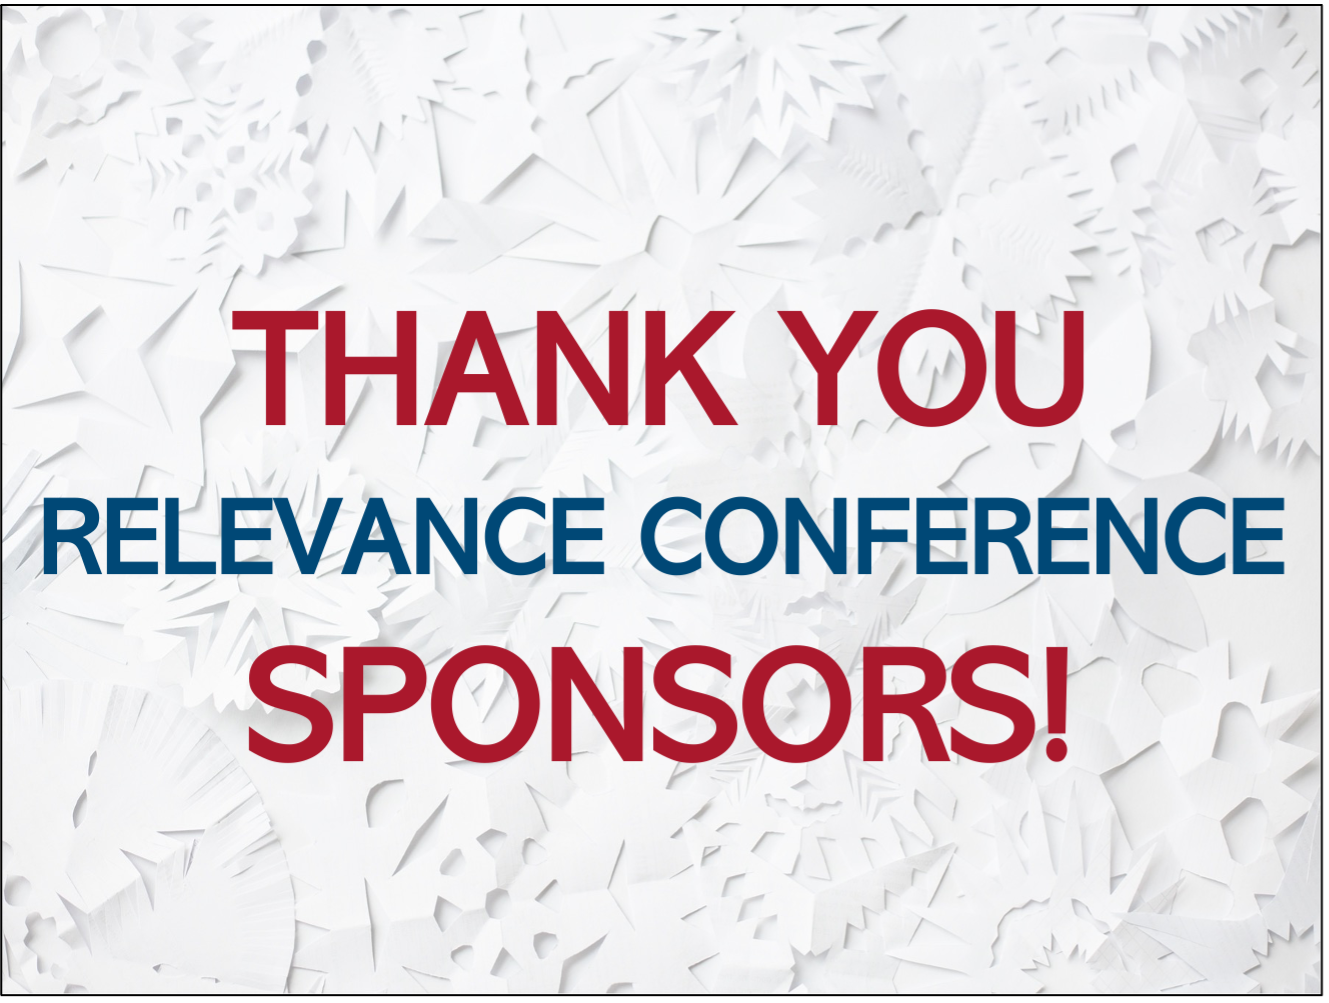 Thank You 2023 Relevance Conference Sponsors